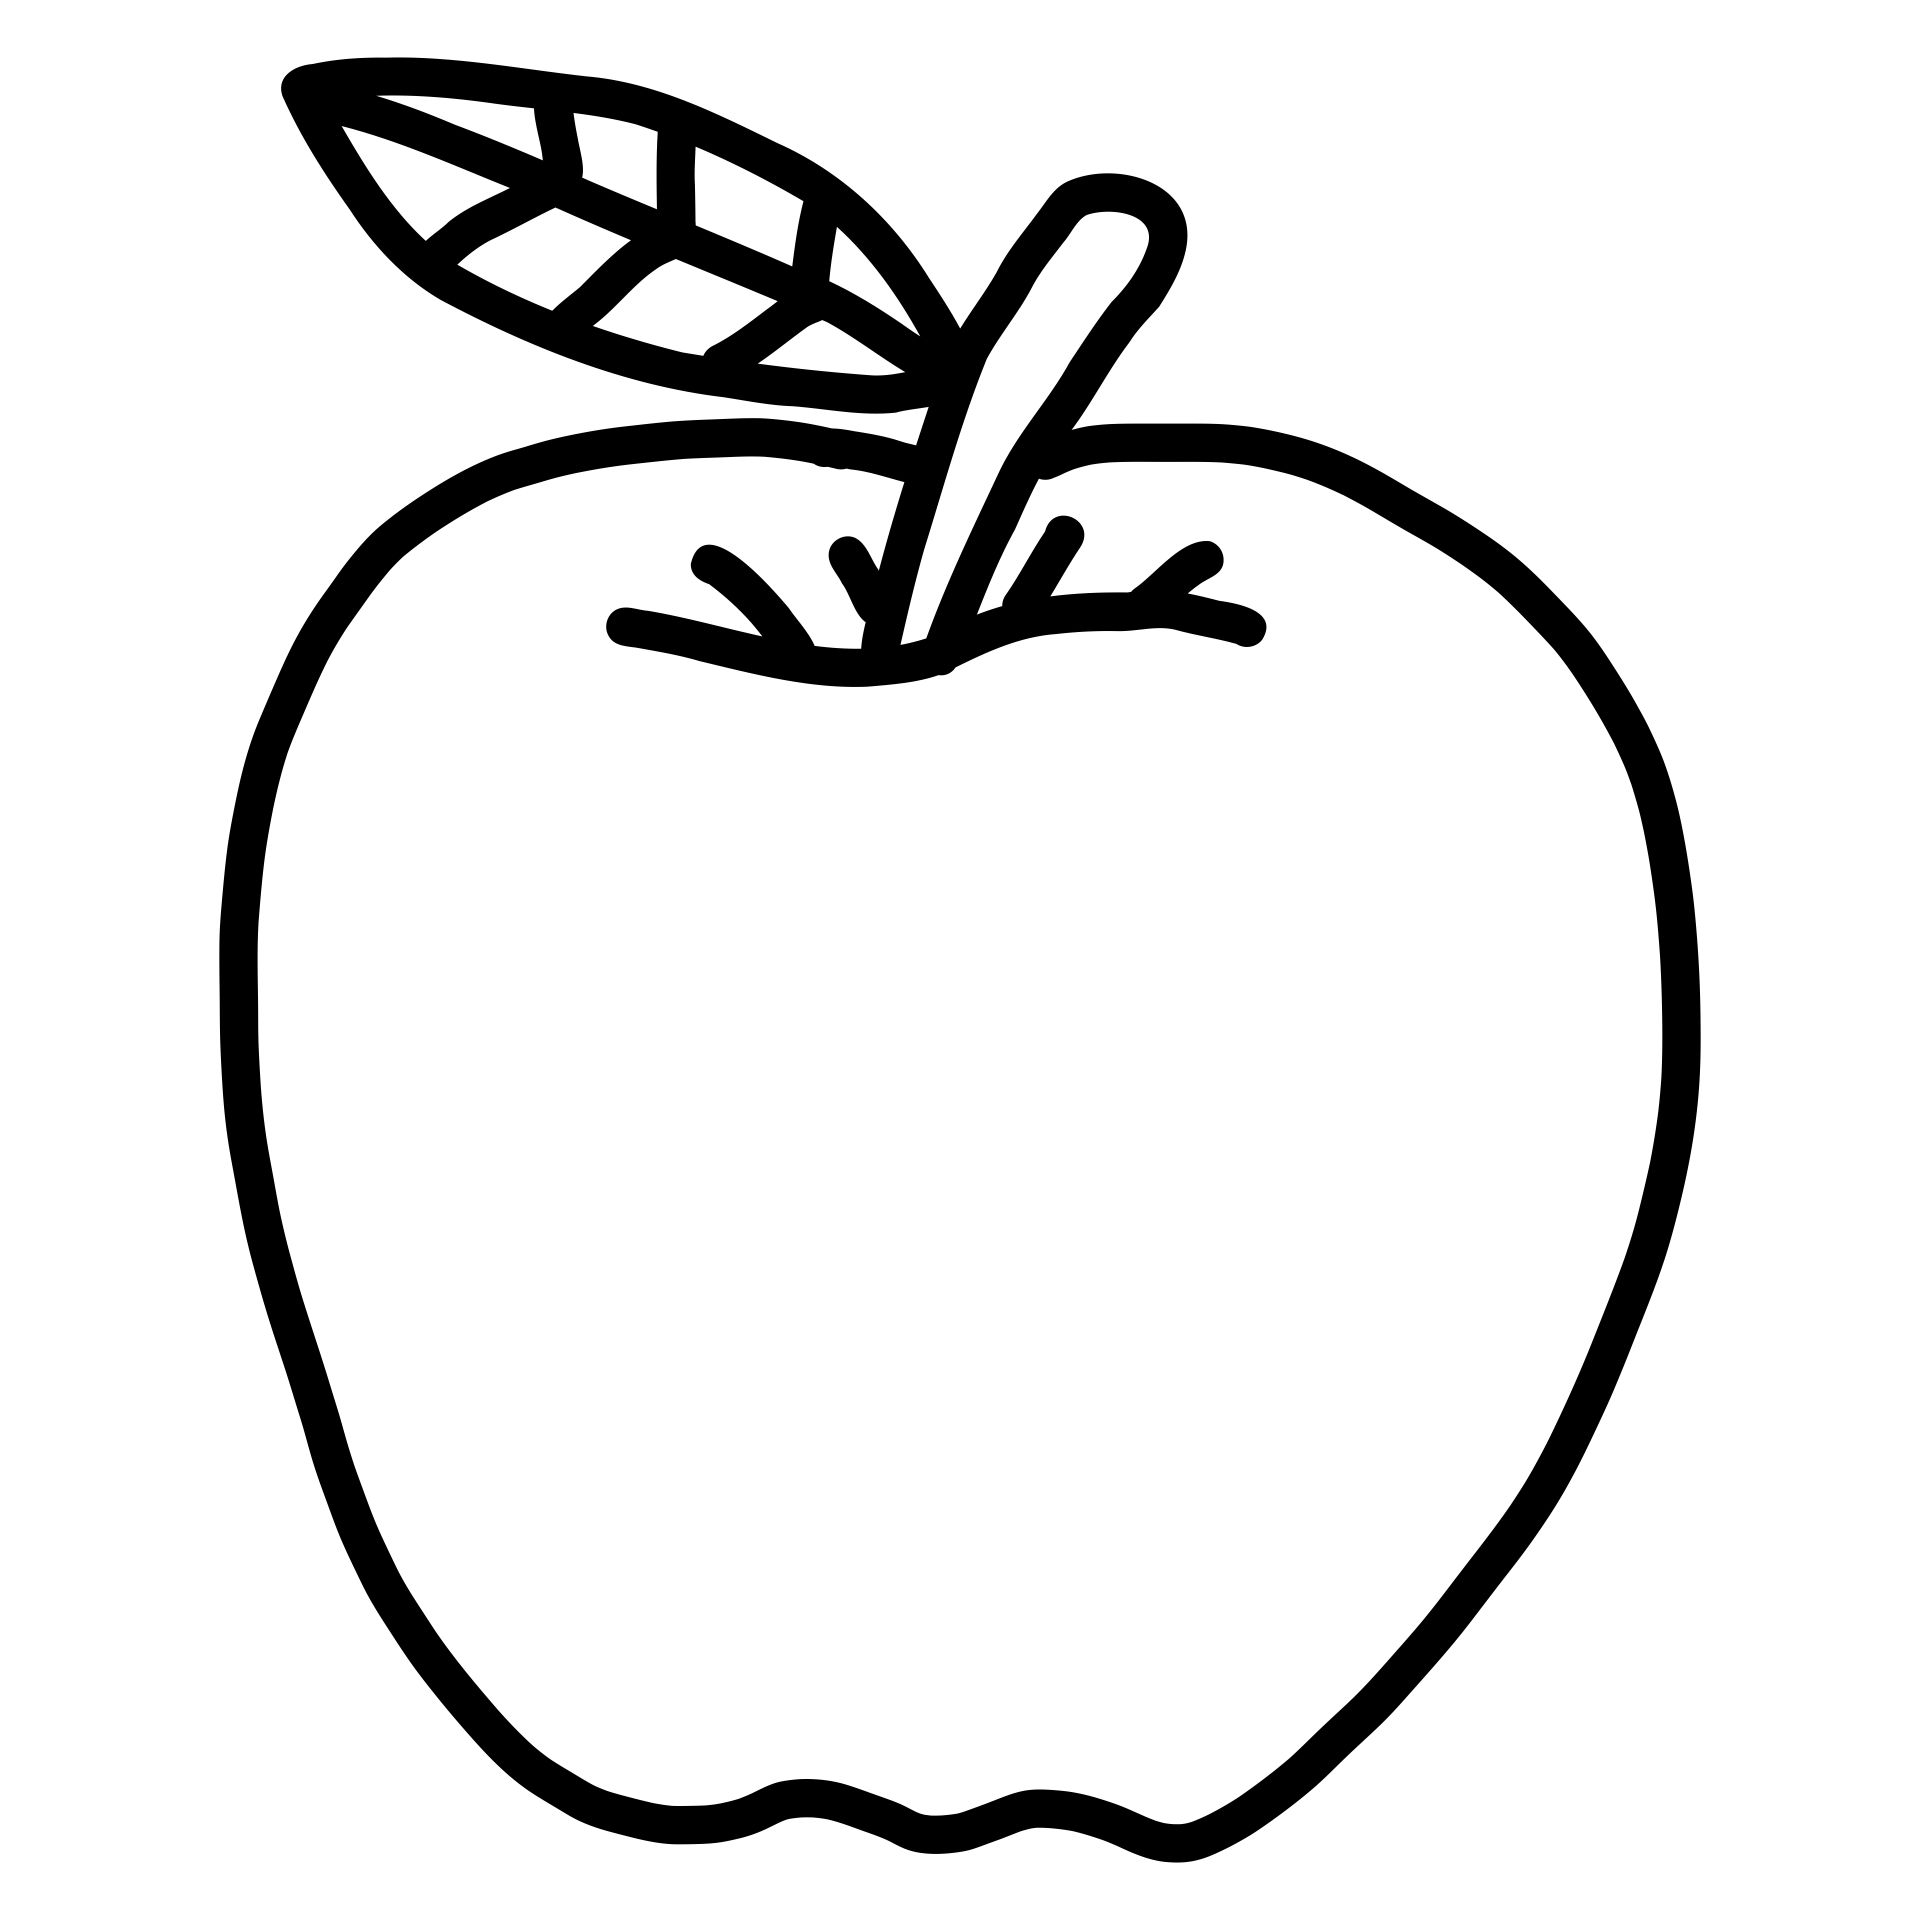 using apple pages to write a book